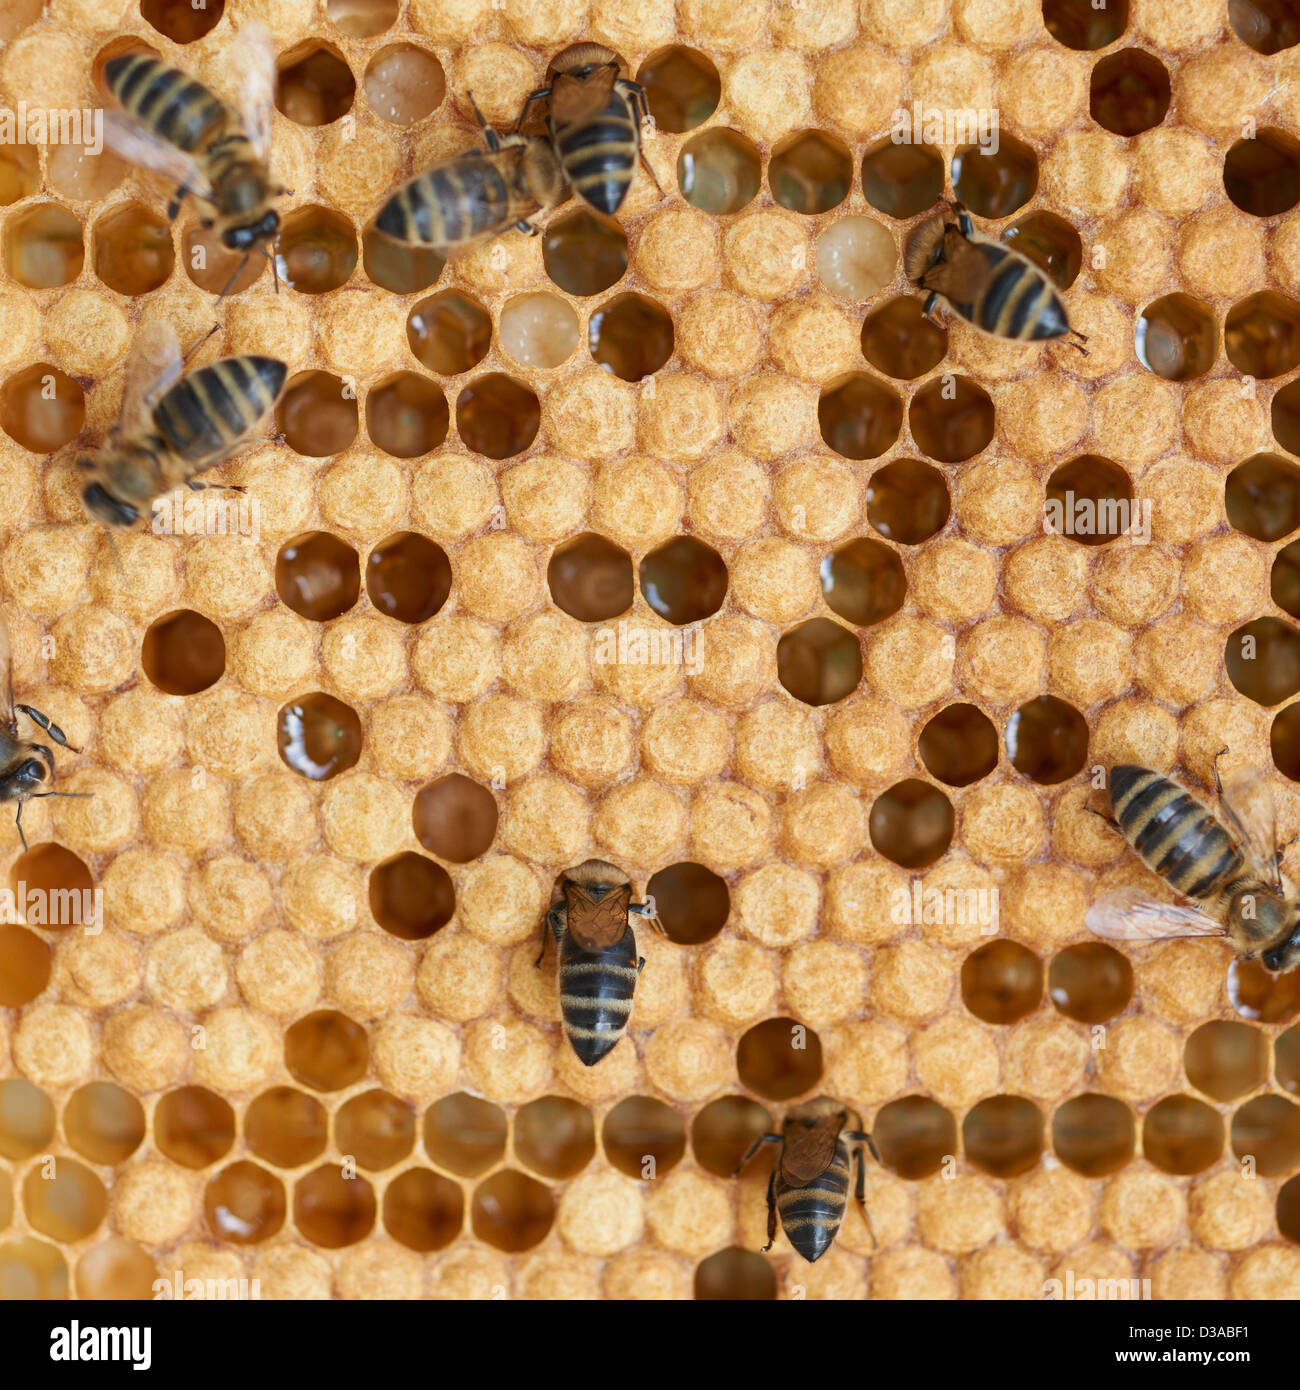 Honeycomb and worker honey bees close-up Stock Photo